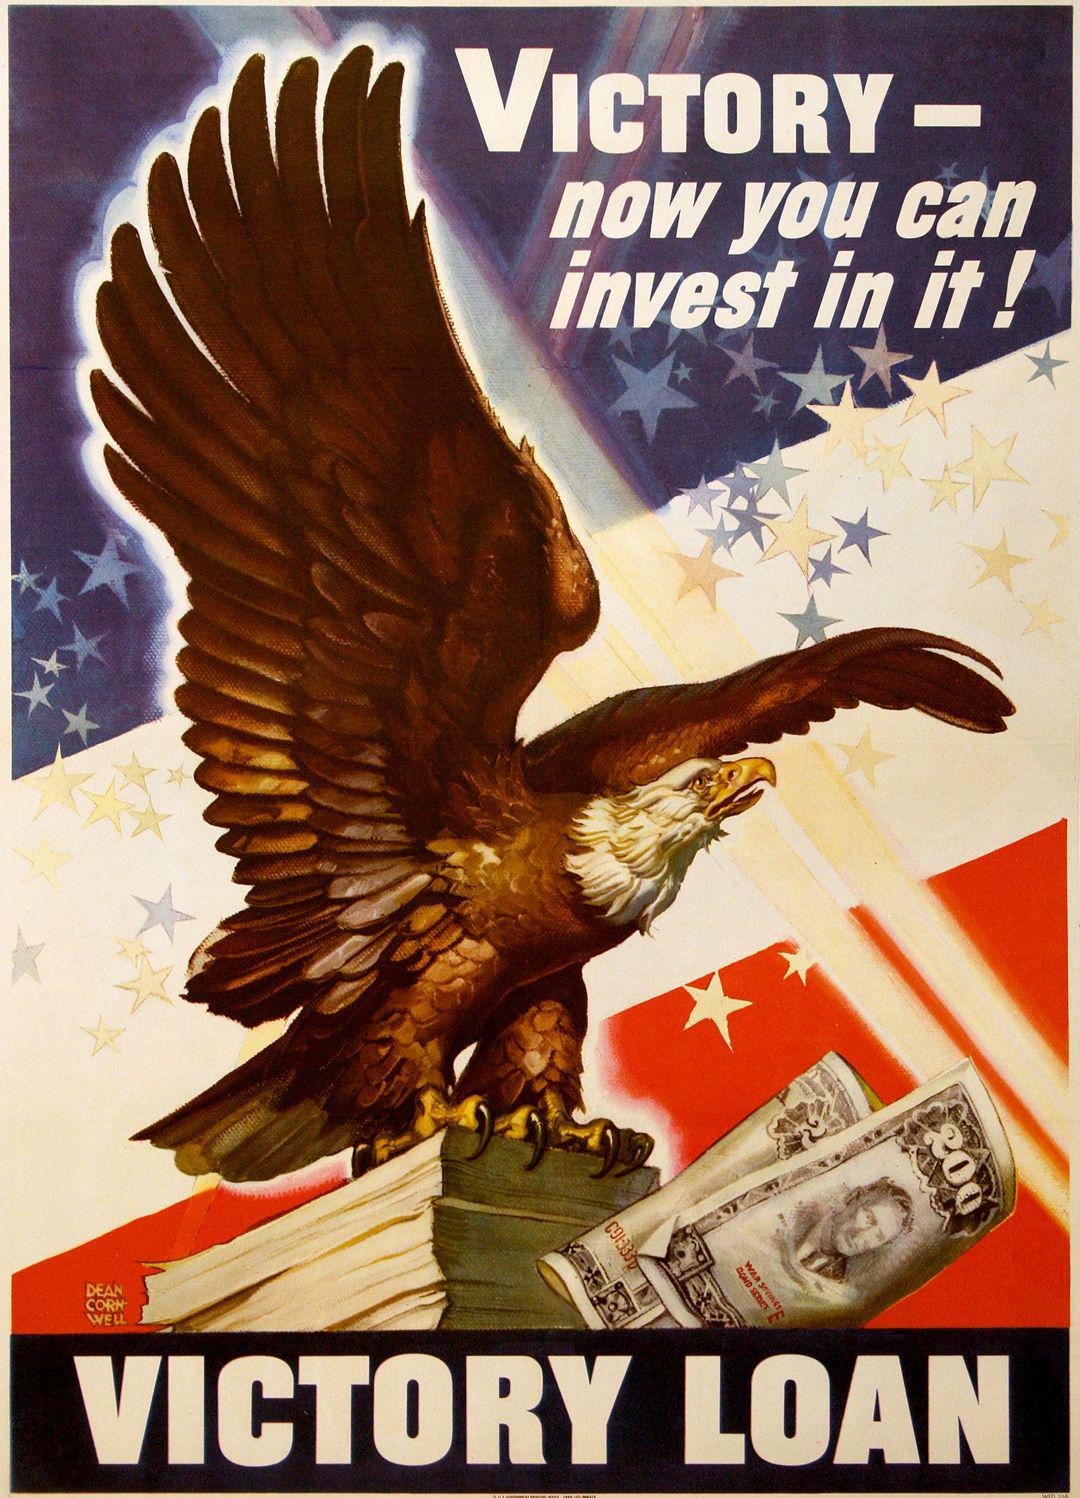 Original American WWII Poster 1945 by Dean Cornwell - Victory Now You Can Invest In It